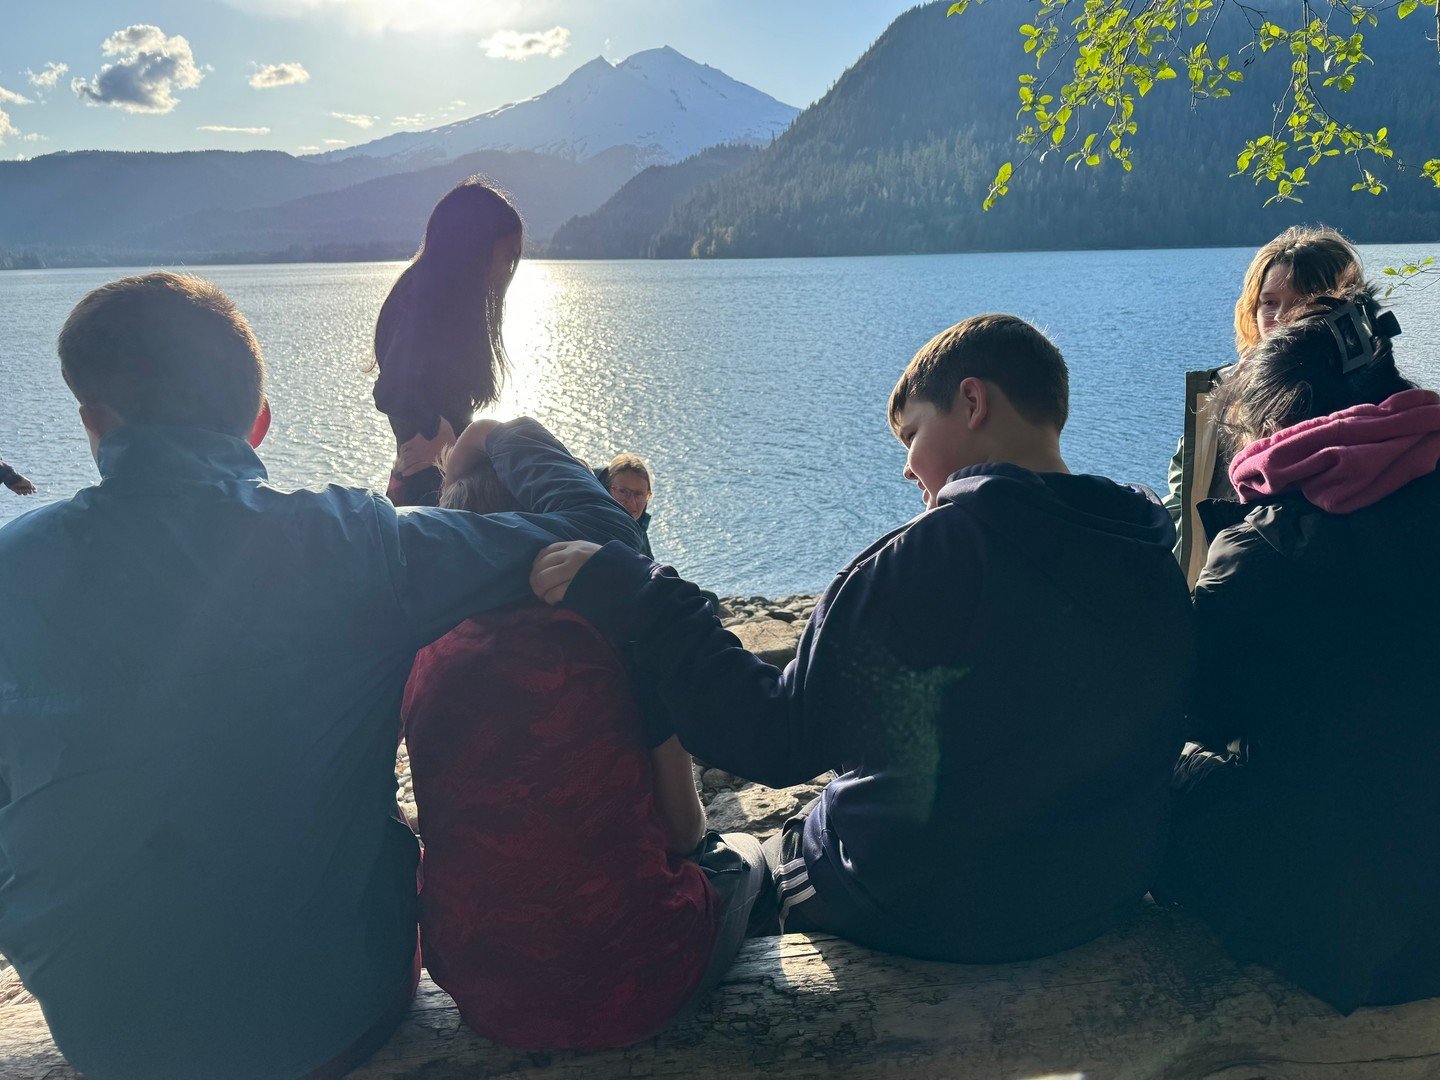 Overnight trips at Billings allow for peers to connect outside of school, sharing the struggles of backpacking but sharing in the fun. #BillingsMiddleSchool